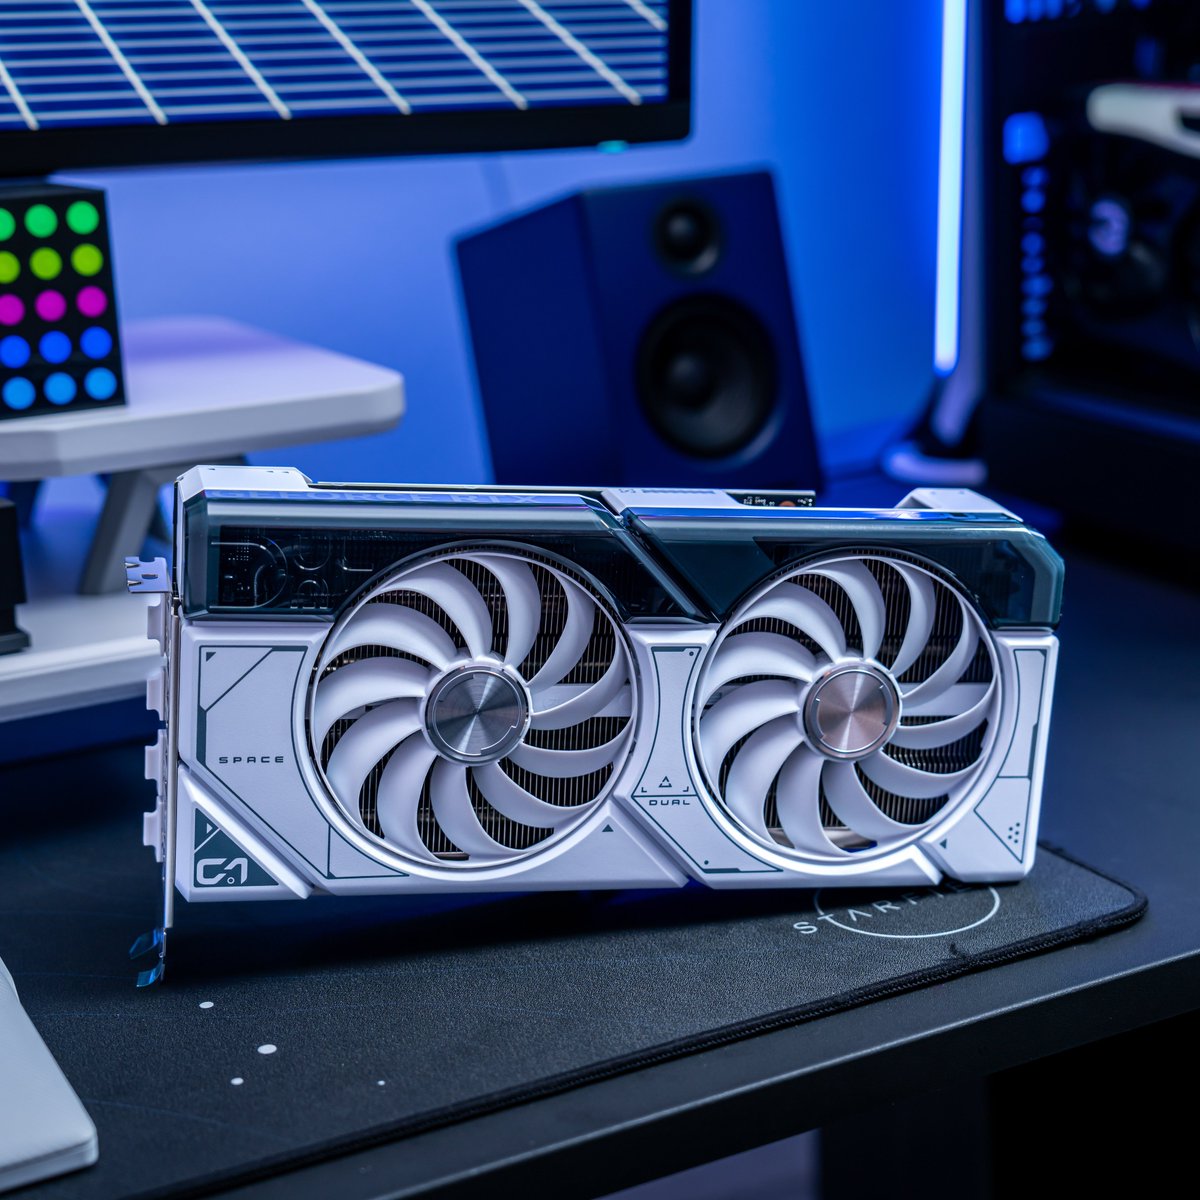 This 4070 Super is honestly one of the most exciting parts of my upcoming build, and I can’t believe how beautiful it is! #custombuild #pcbuild